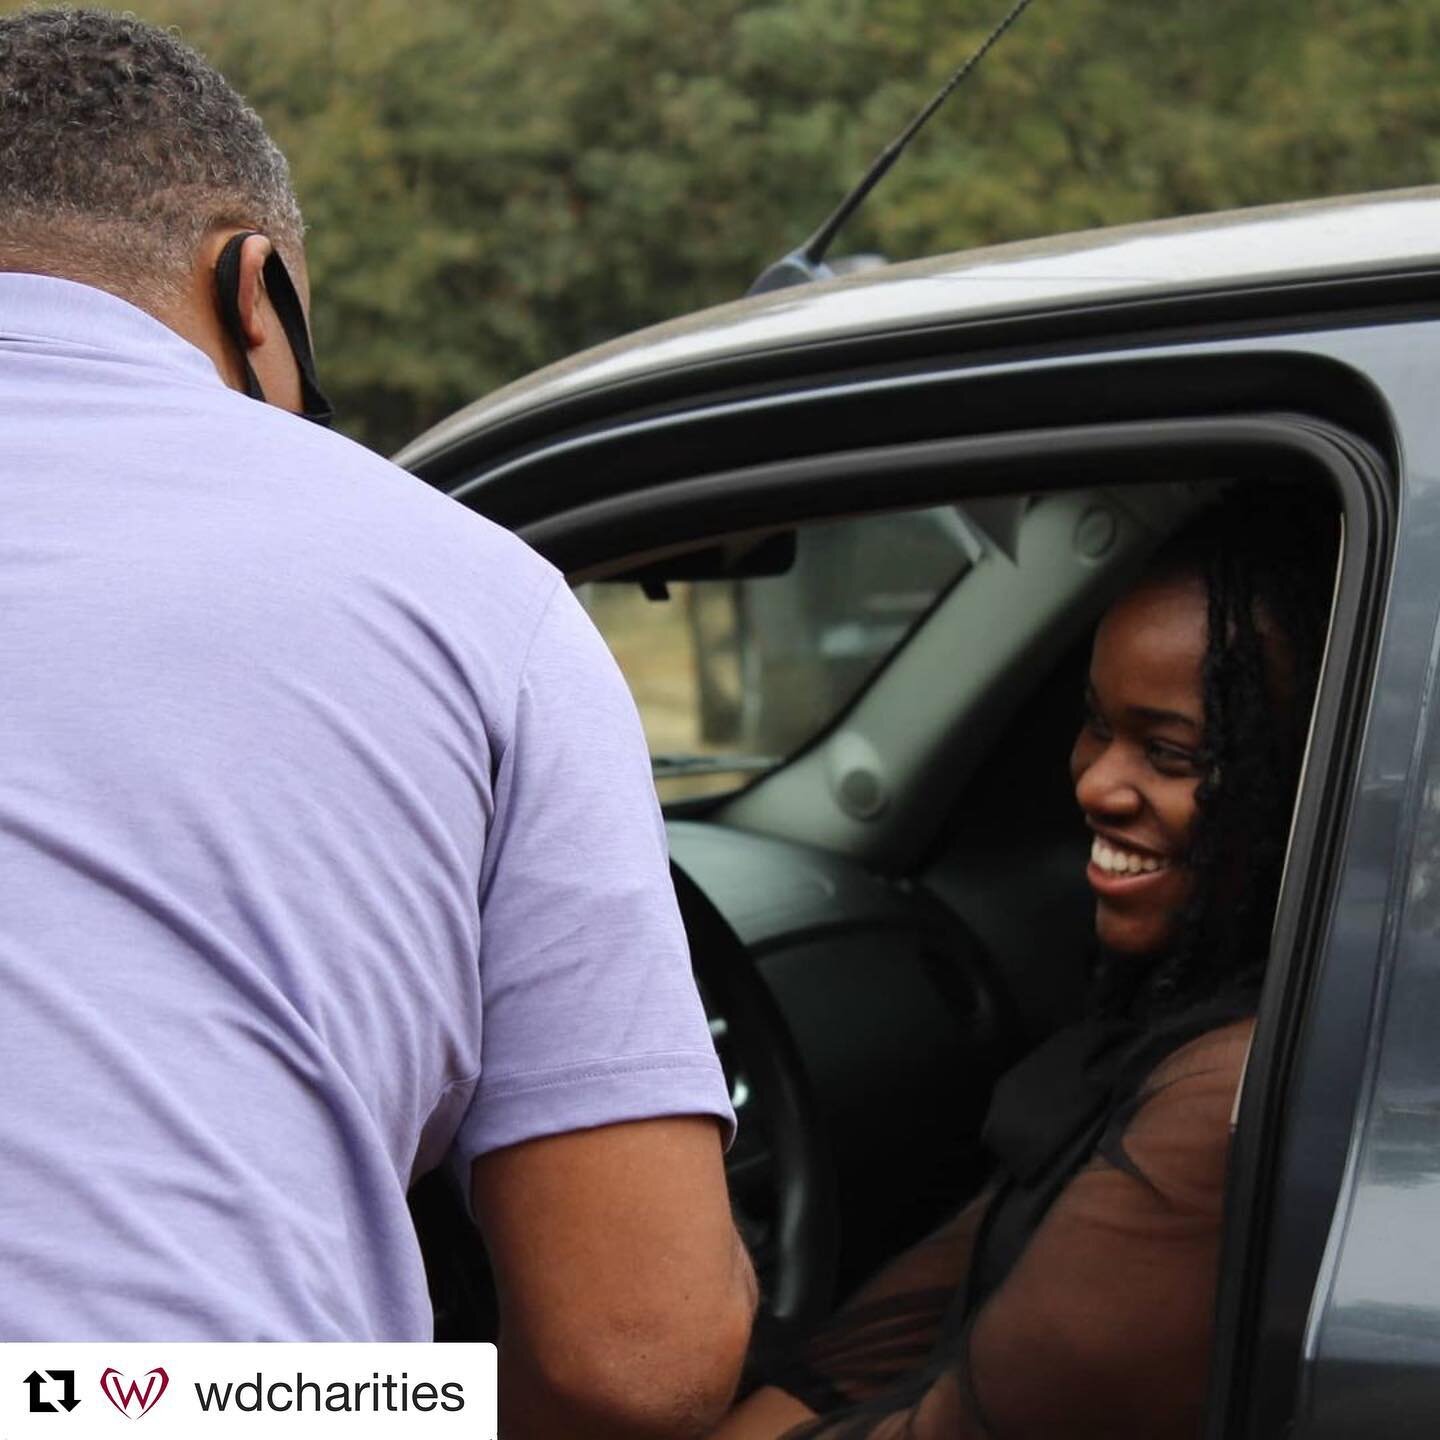 #Repost @wdcharities with @get_repost
・・・
WDC is excited to welcome Homes for the Holidays recipient #188, Ms. Eureka, her Mother, and her two young sons to our family! Little did they know the many surprises we had in store for them, and that 2021 w